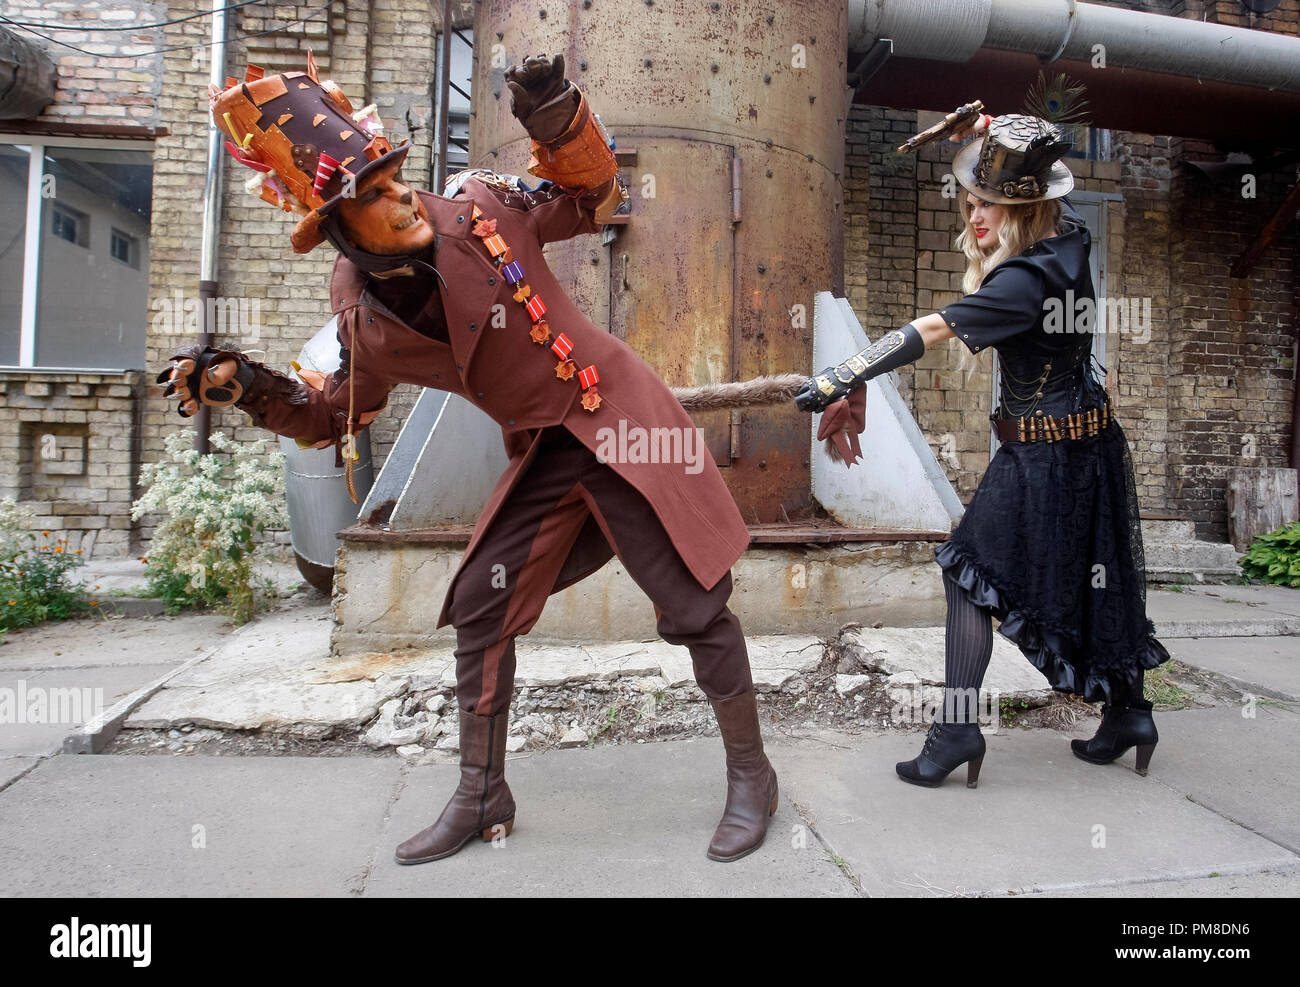 A couple wearing steampunk costumes is seen performing during 'VI KyivSteamCon' event in Kiev. The Steampunk festival involving workshops, talks, competitions, dances and lectures attracts fans of subgenre steampunk, cosplay and science fiction. Stock Photo